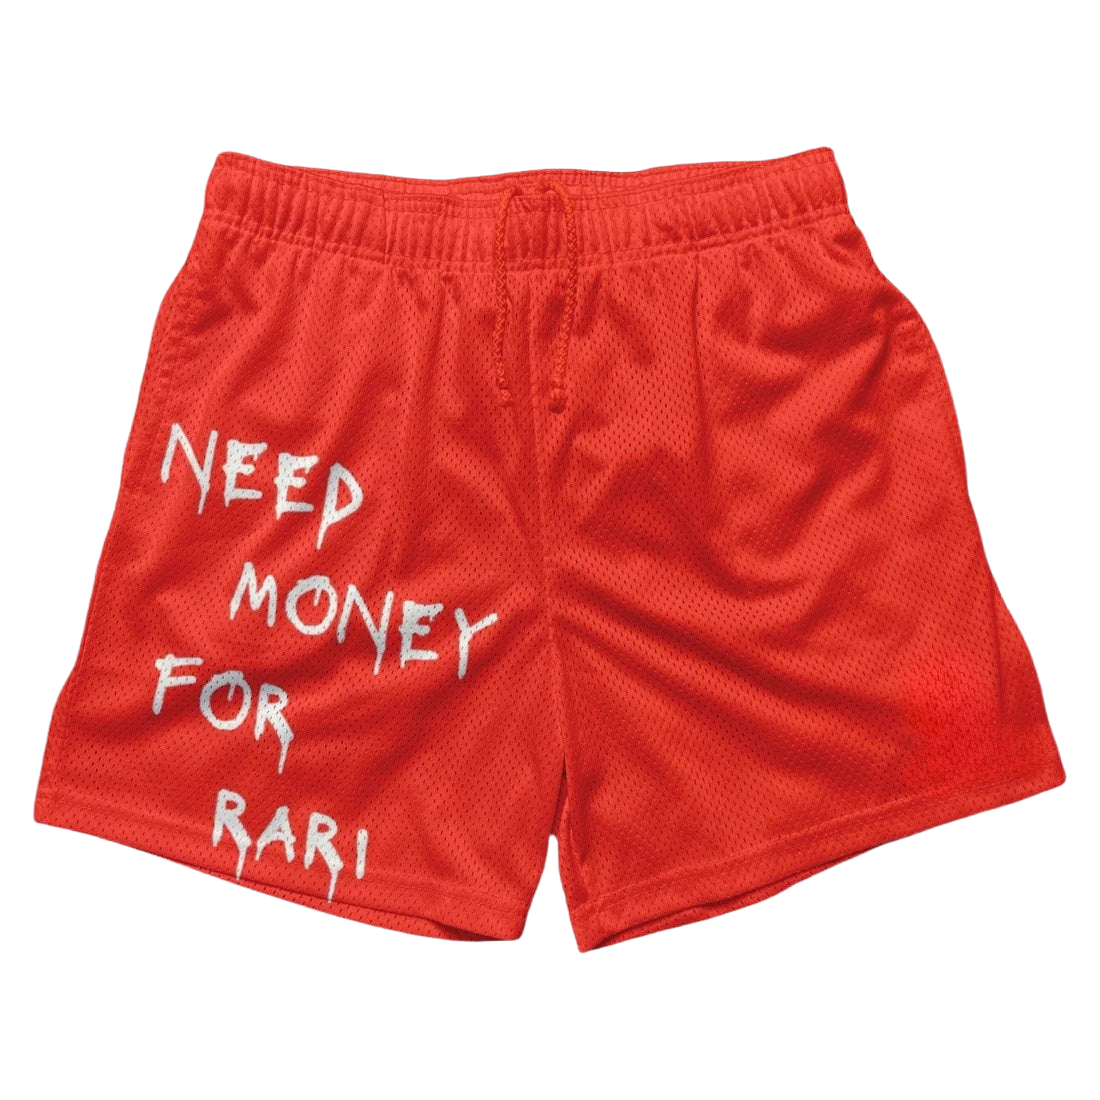 a red shorts that says keep money for rari